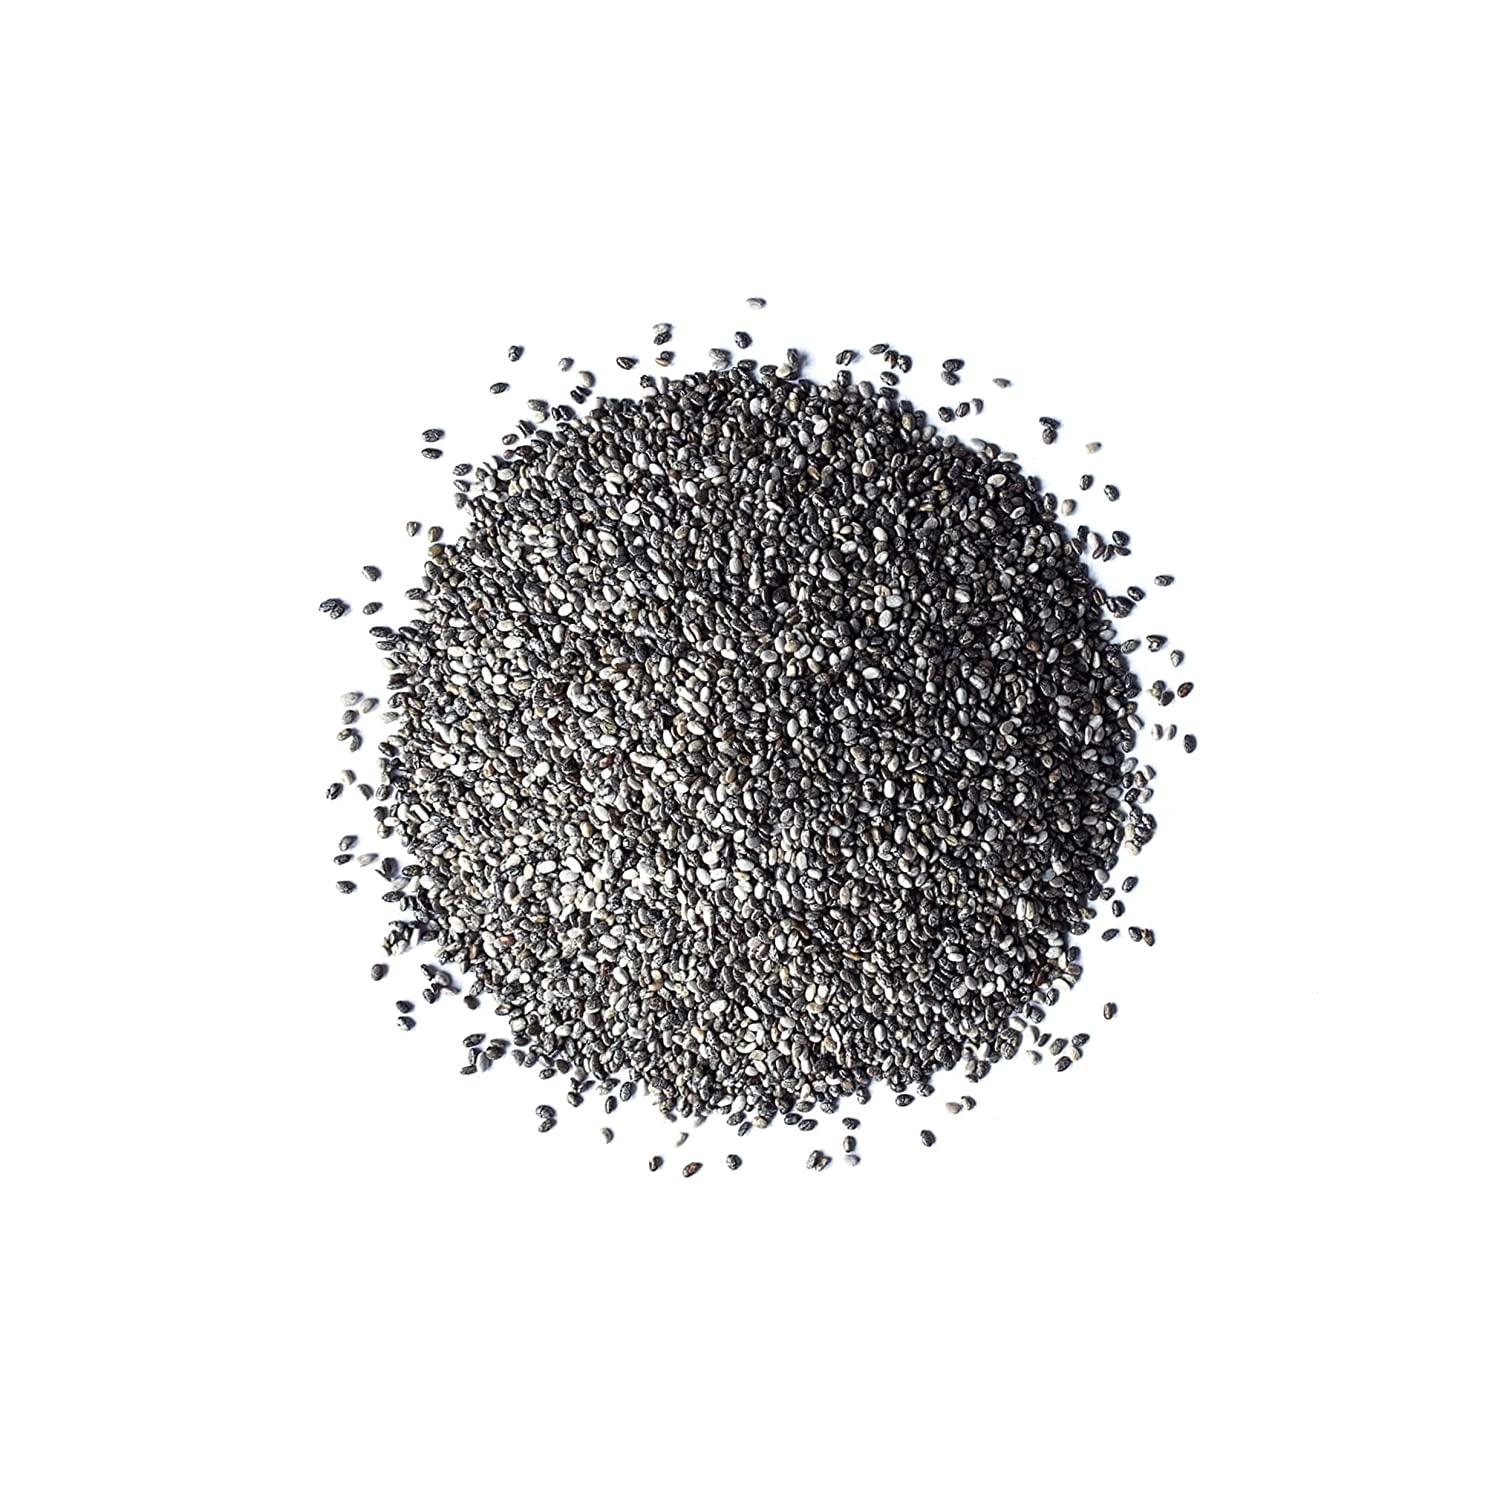 Black Chia Seeds, 2 Pounds Non-GMO Verified, Whole, Sproutable, Vegan,  Kosher, Keto, Sirtfood, Bulk. Rich in Essential Fatty Acids, Fiber,  Protein. Great for Chia Pudding, Smoothie, Oatmeal.